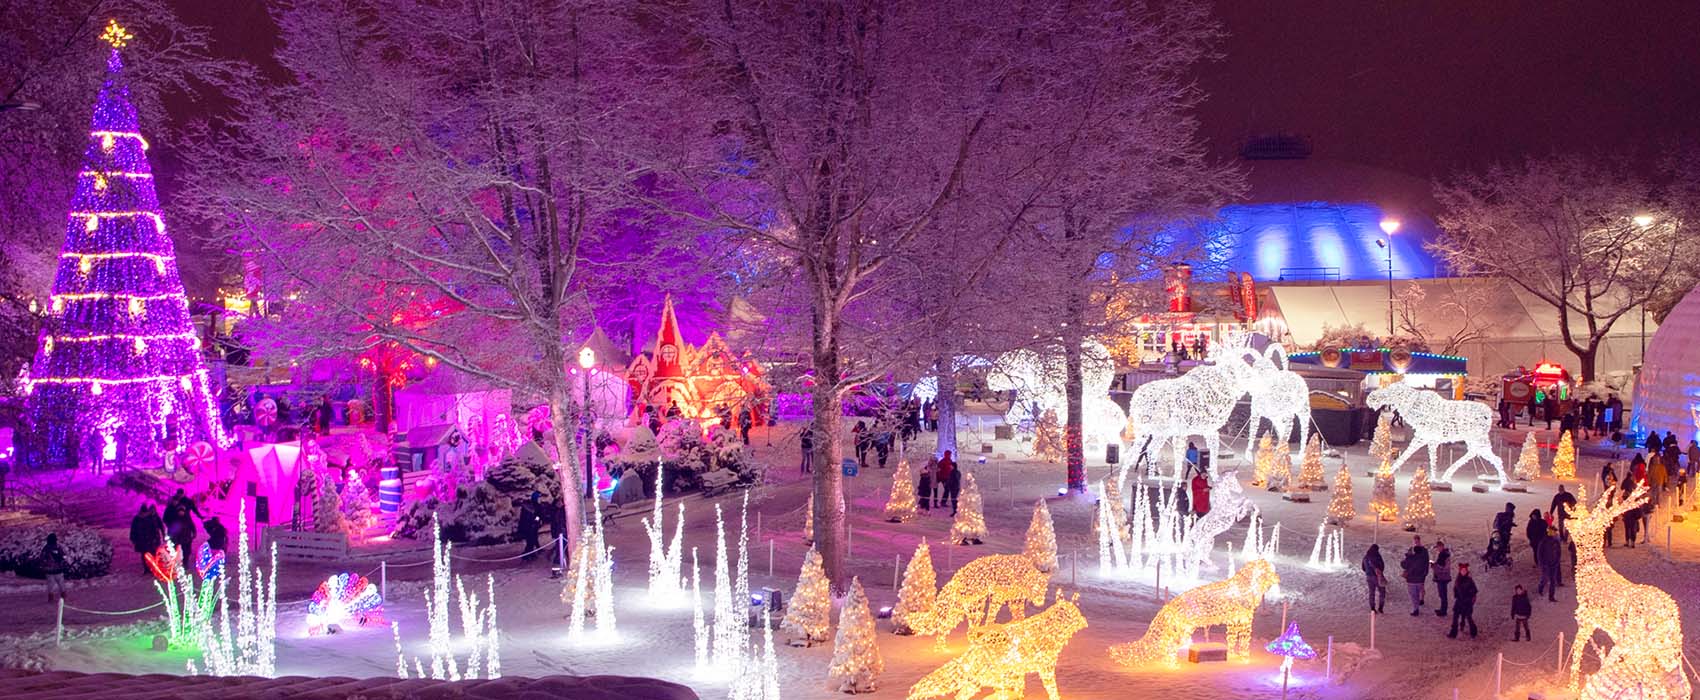 People walk on snow covered ground in between large illuminated statues at the PNE Winter Fair